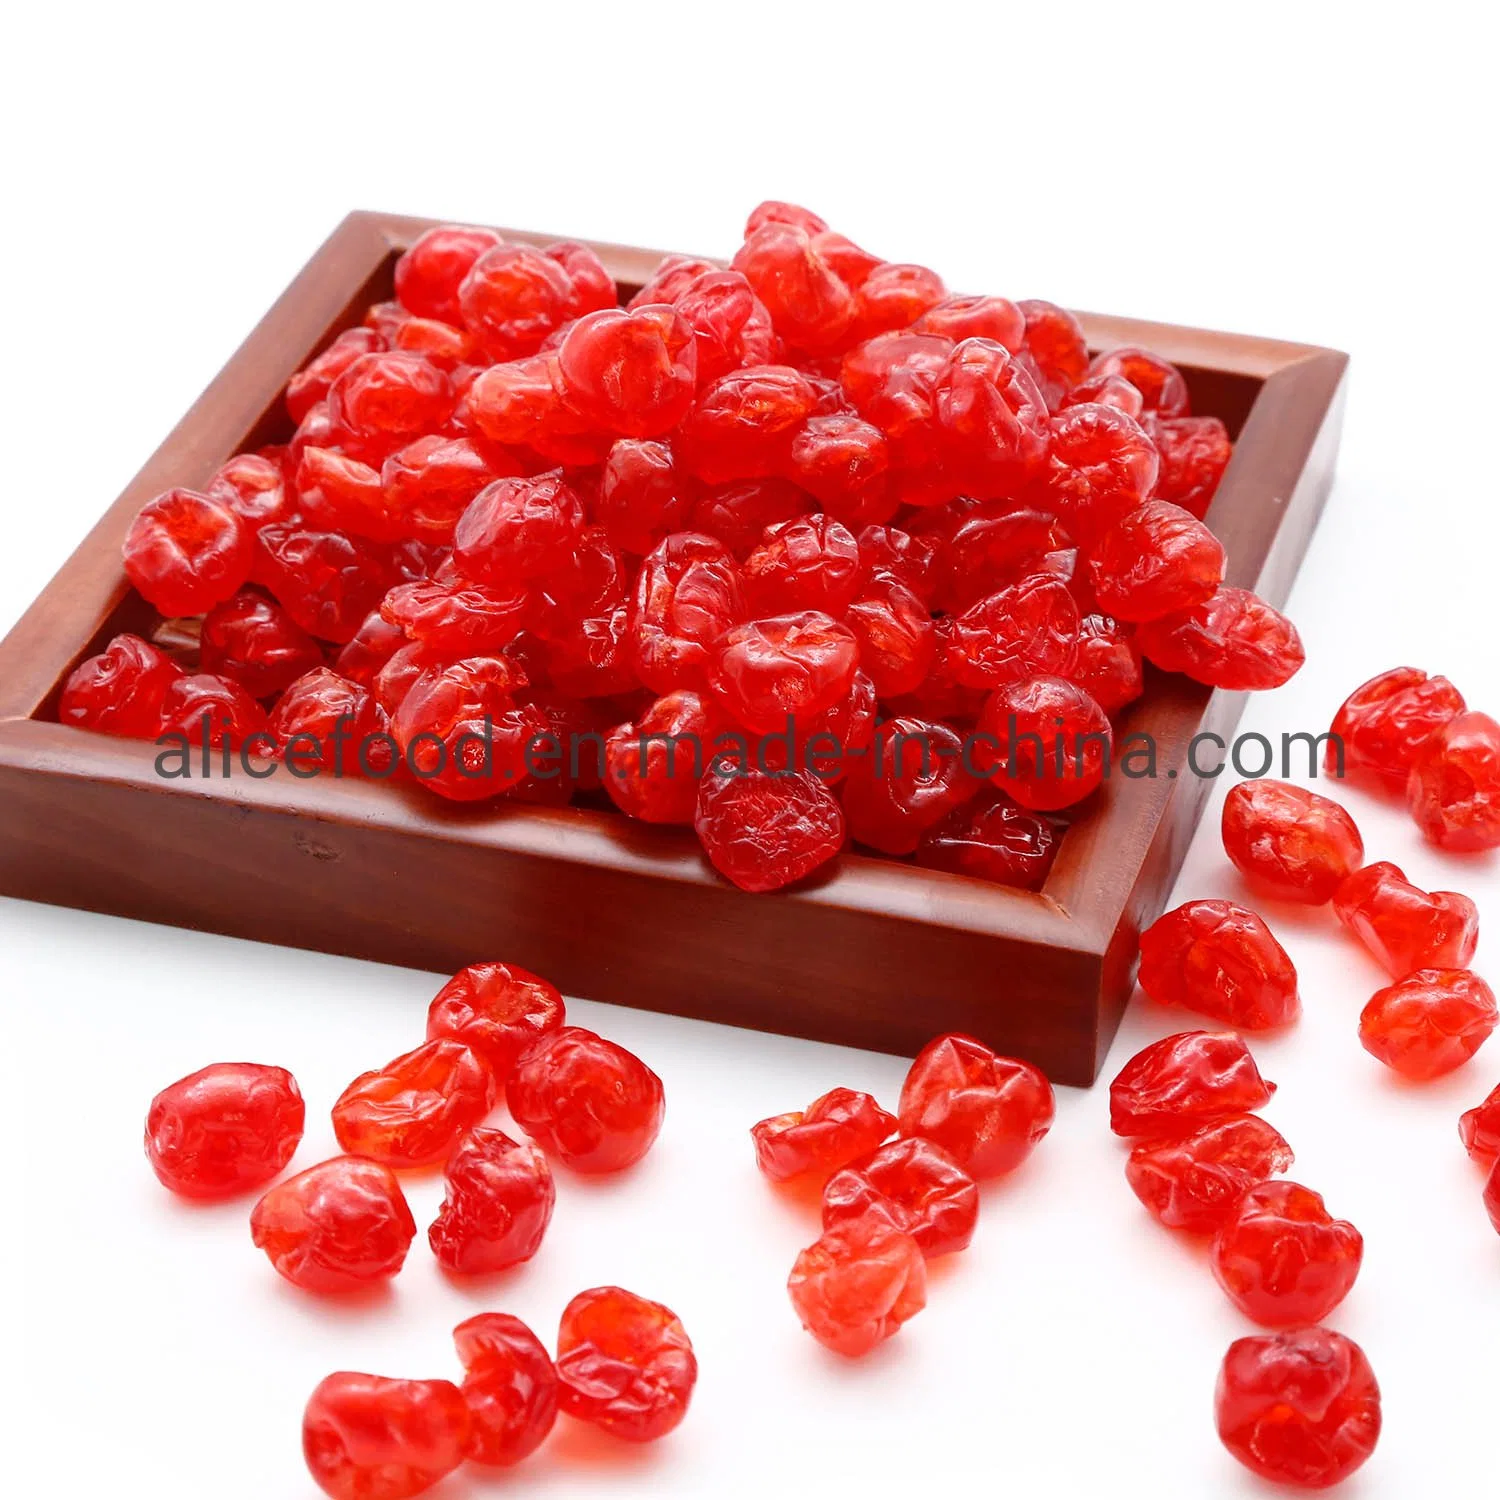 Wholesale Dried Fruits Price Factory Direct Sale Good Quality Sweet Dried Red Cherry